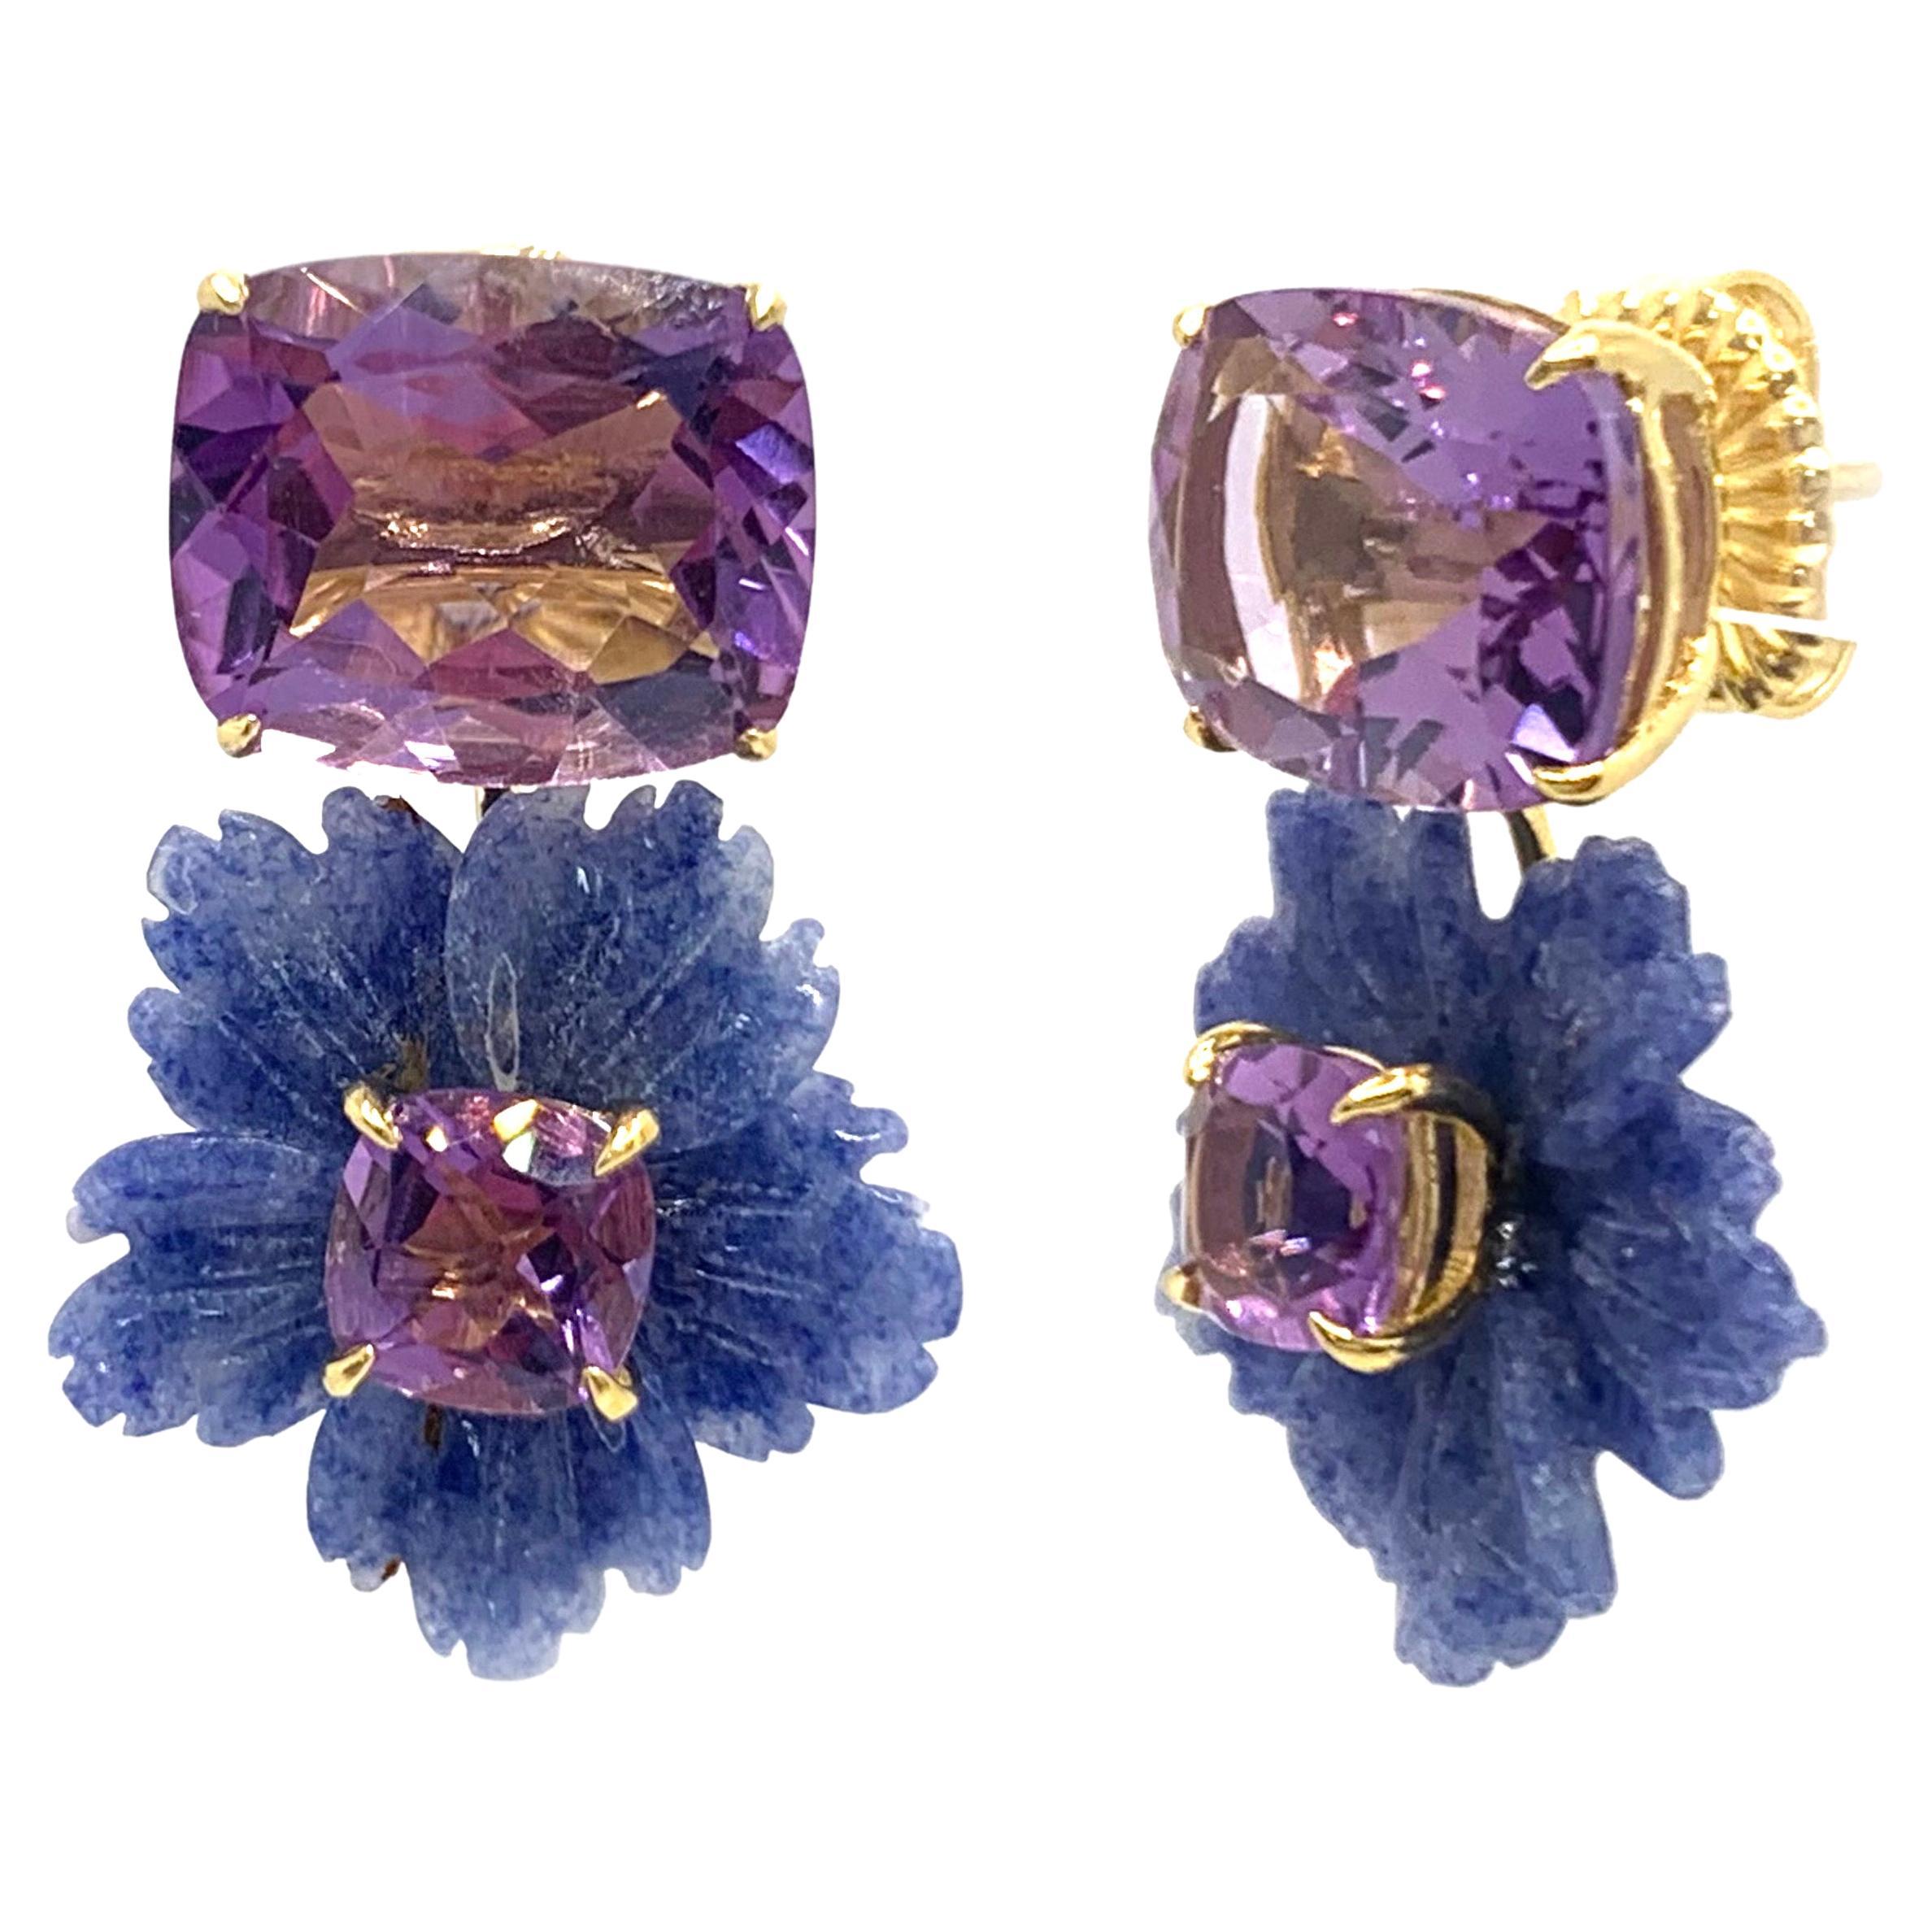 Stunning Cushion-cut Amethyst and Carved Dumortierite Flower Drop Earrings